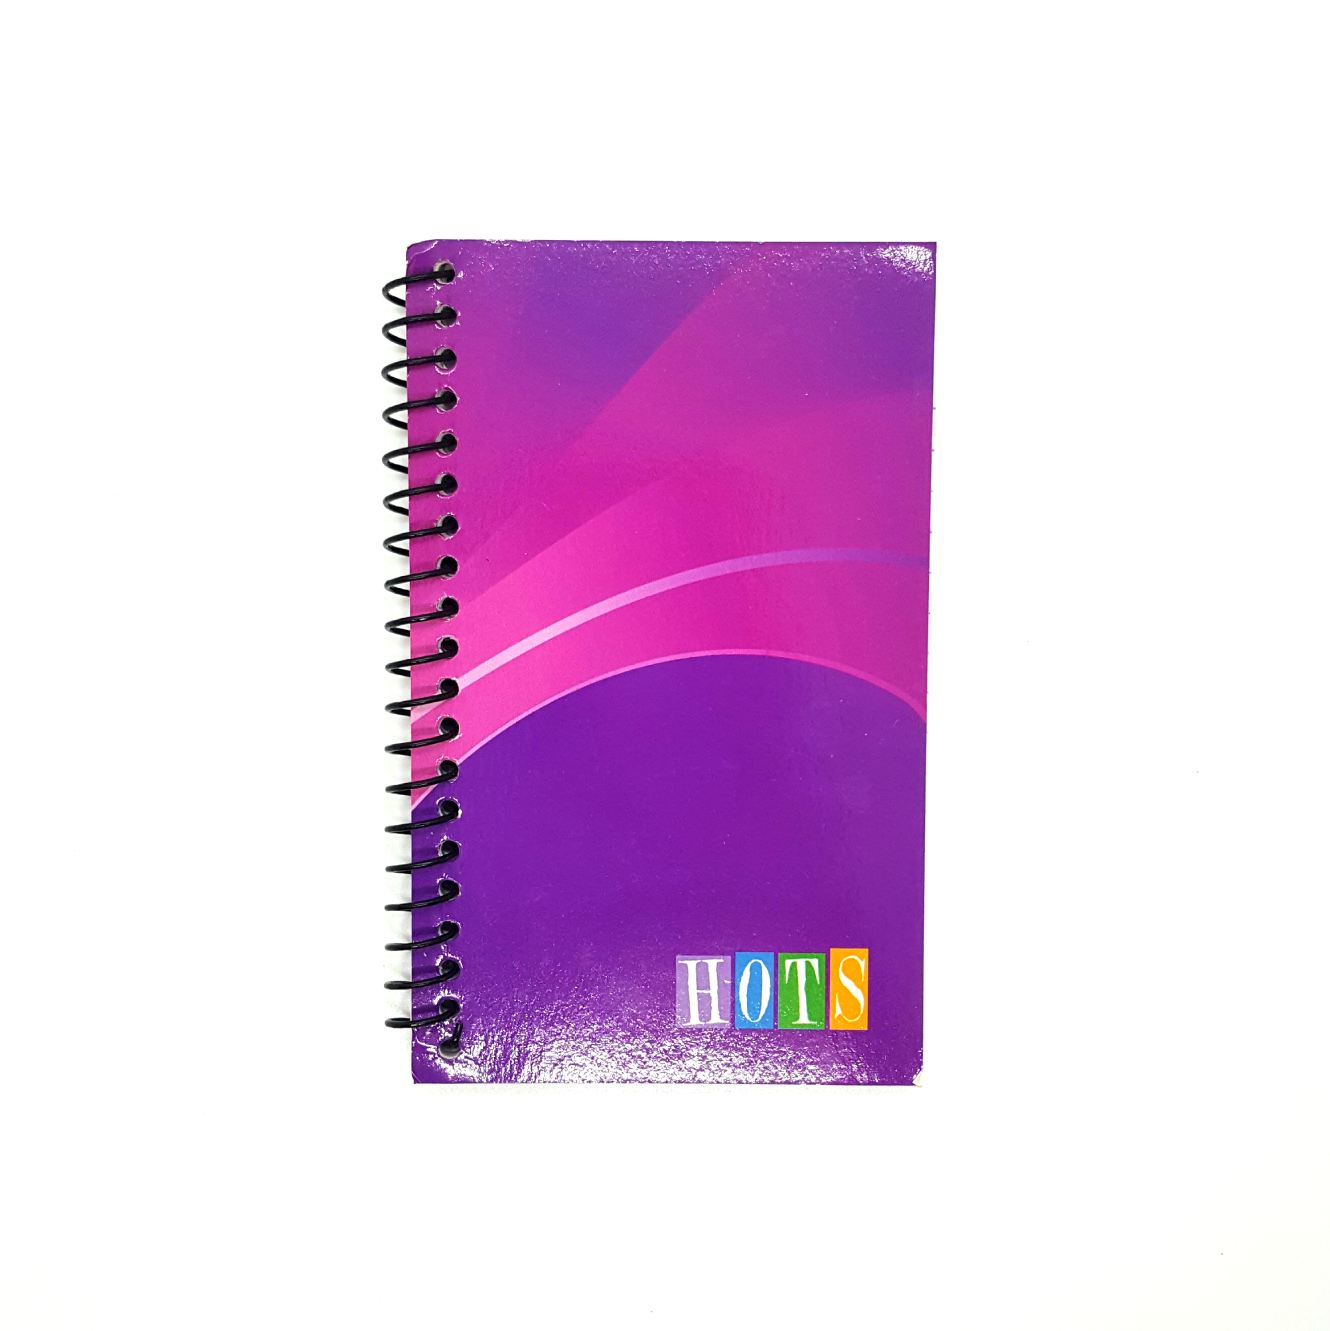 Ergo proxy Spiral Notebook for Sale by Namox